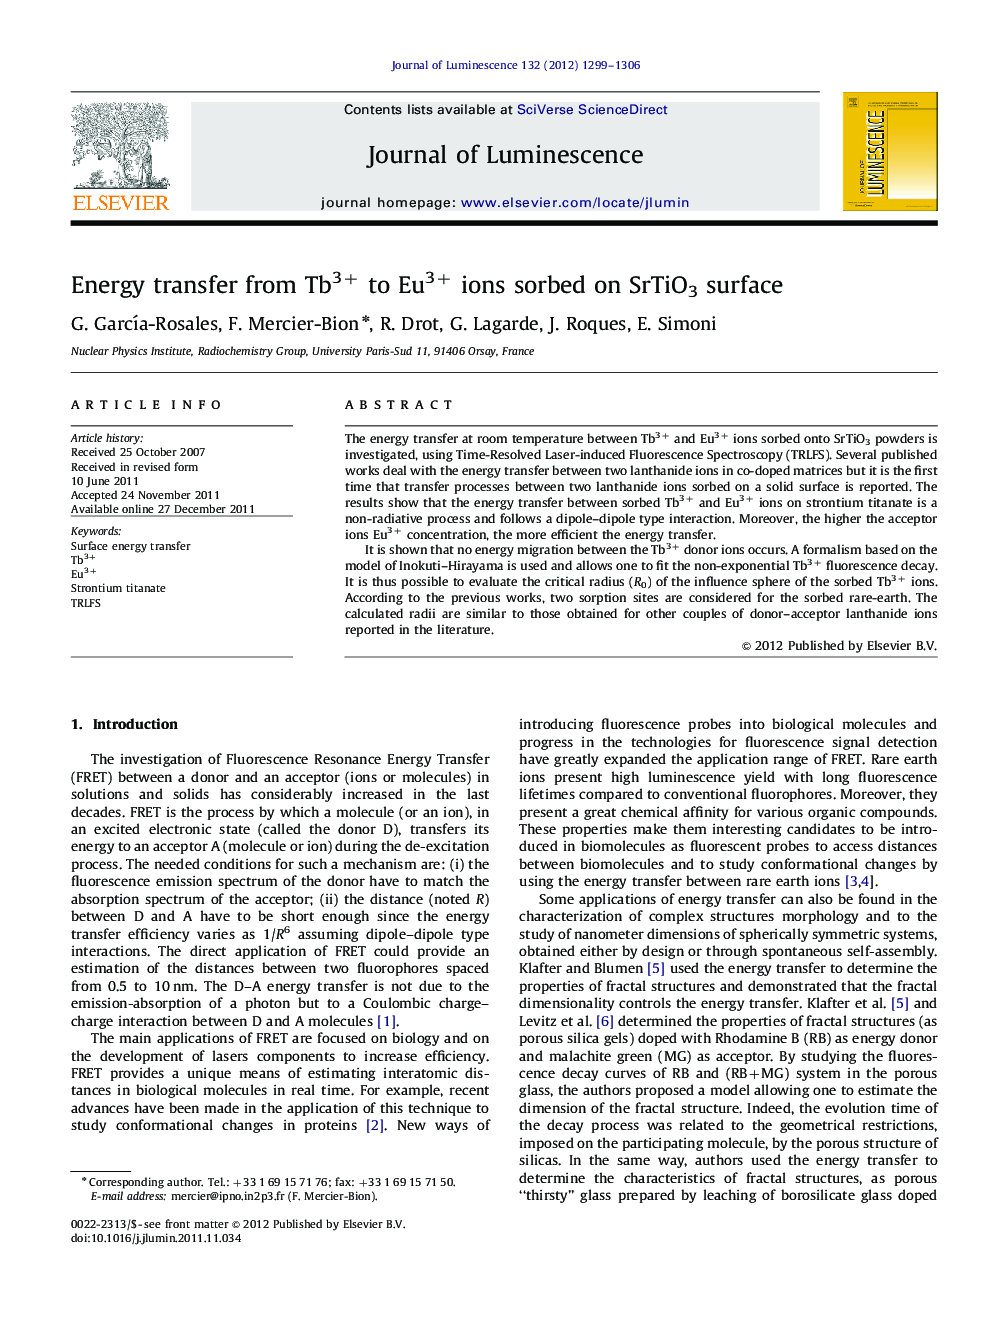 Energy transfer from Tb3+ to Eu3+ ions sorbed on SrTiO3 surface